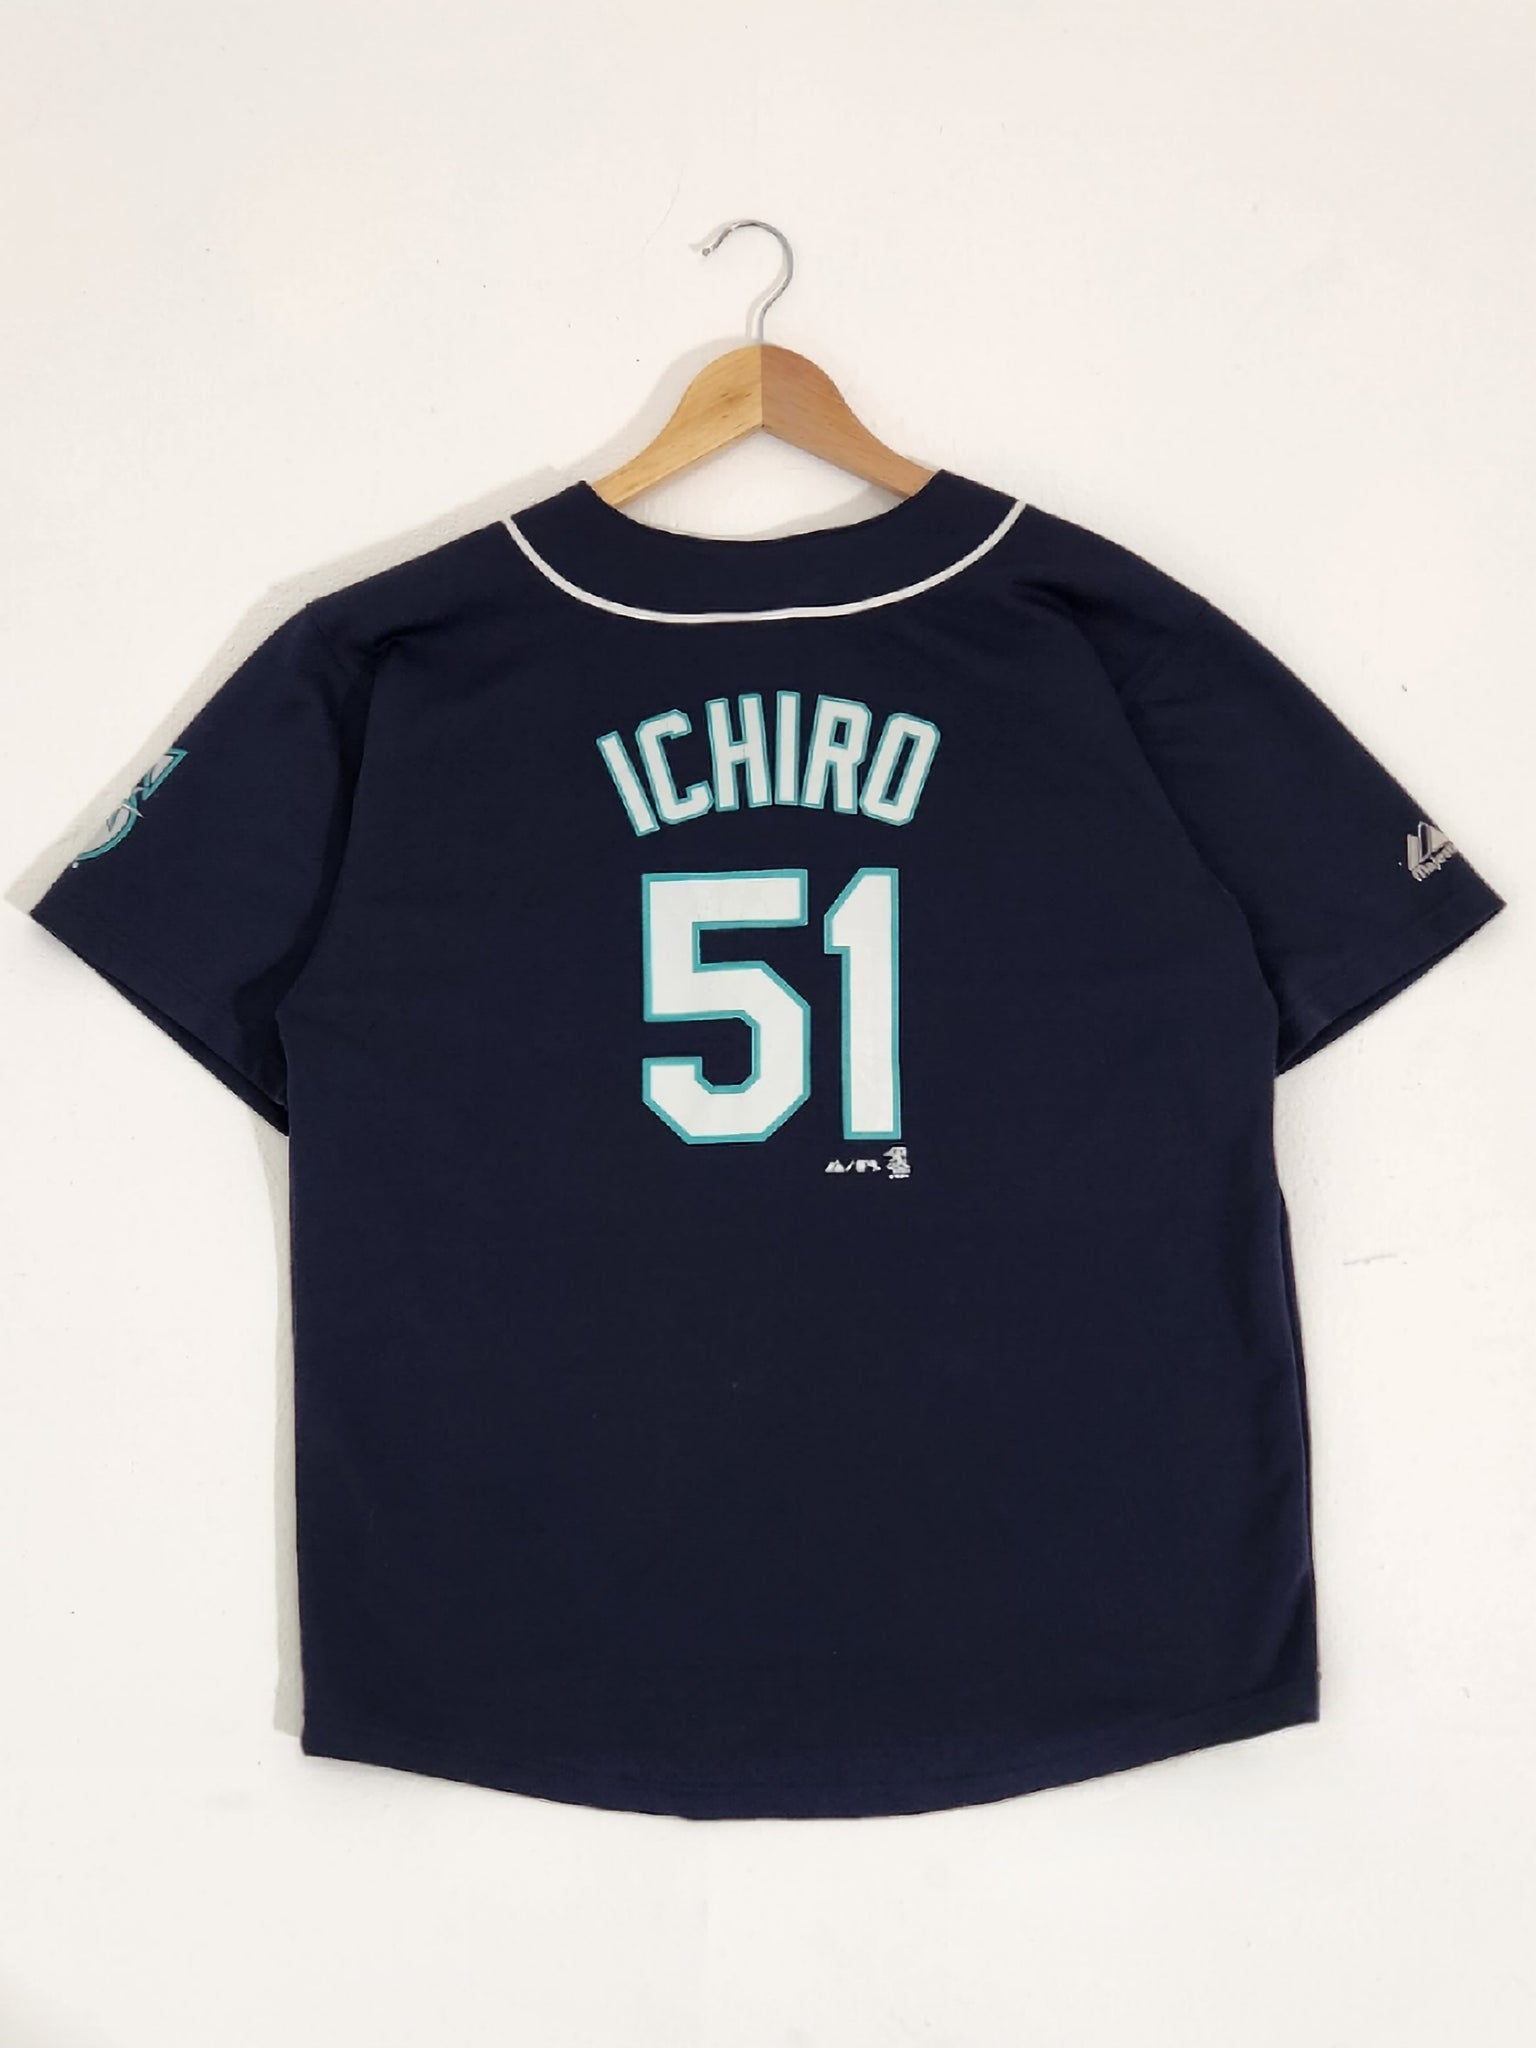 seattle mariners jersey navy